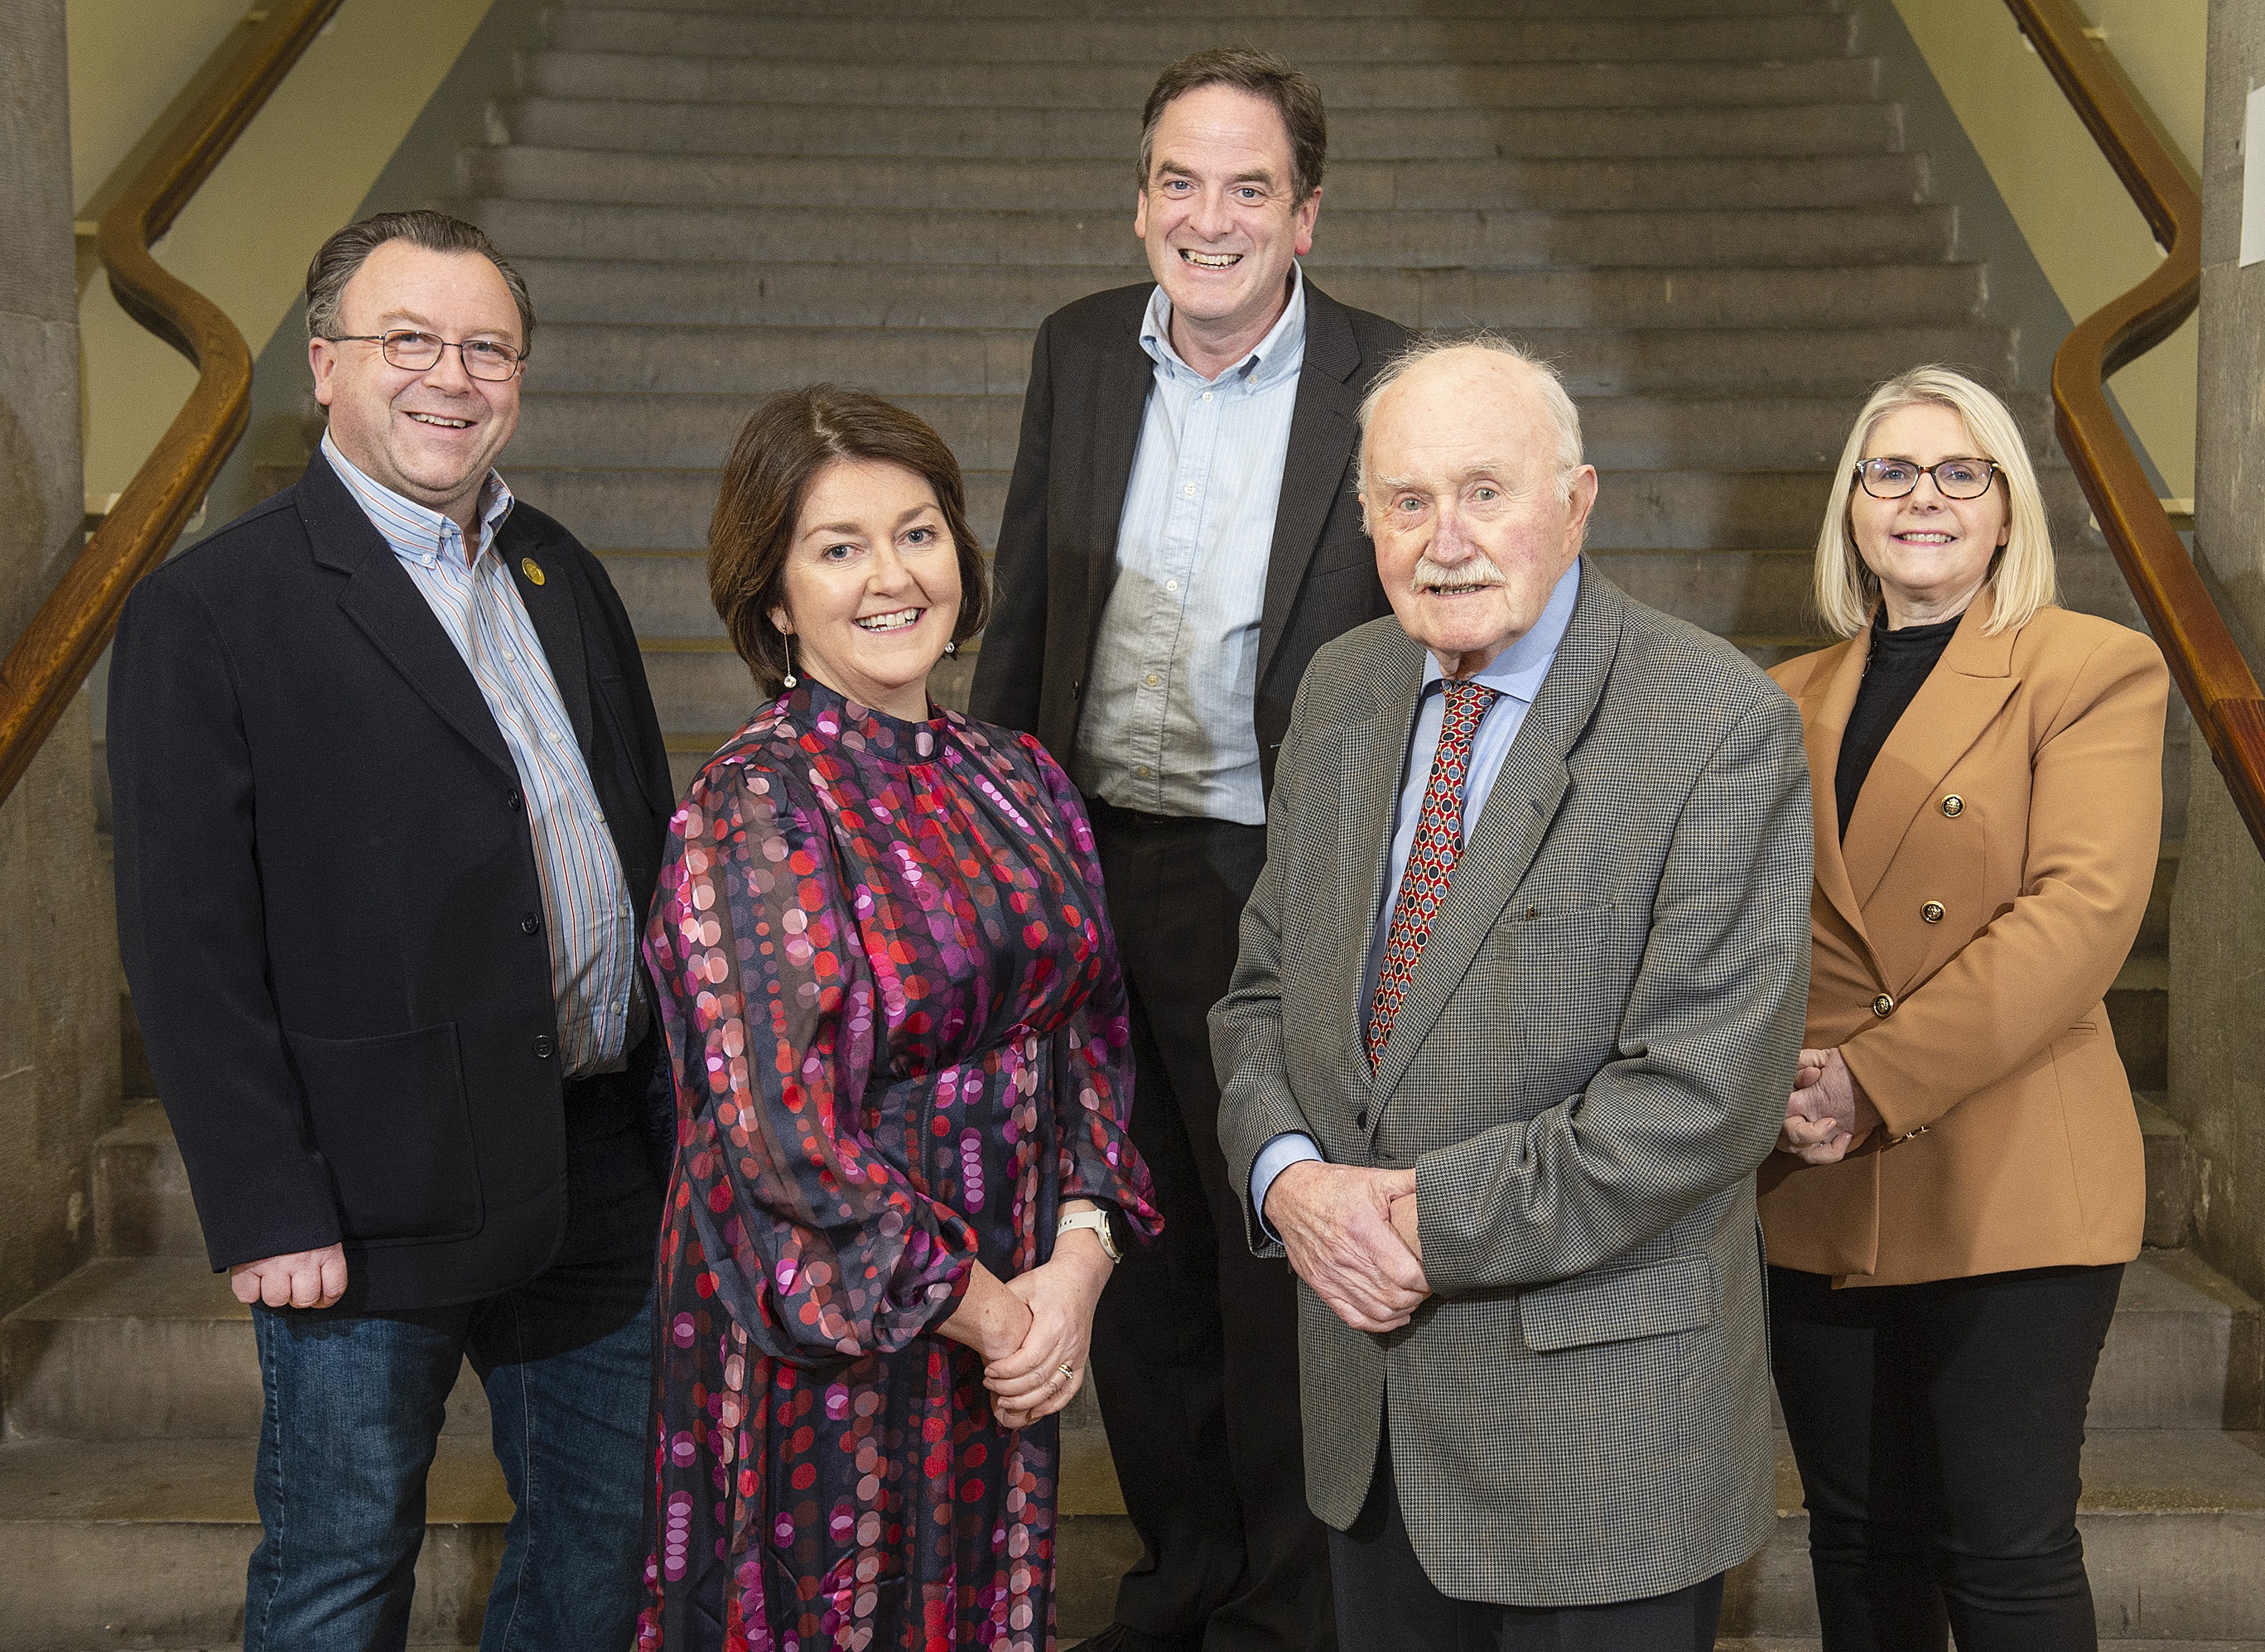 Food scientists gather at UCC for 50th anniversary conference